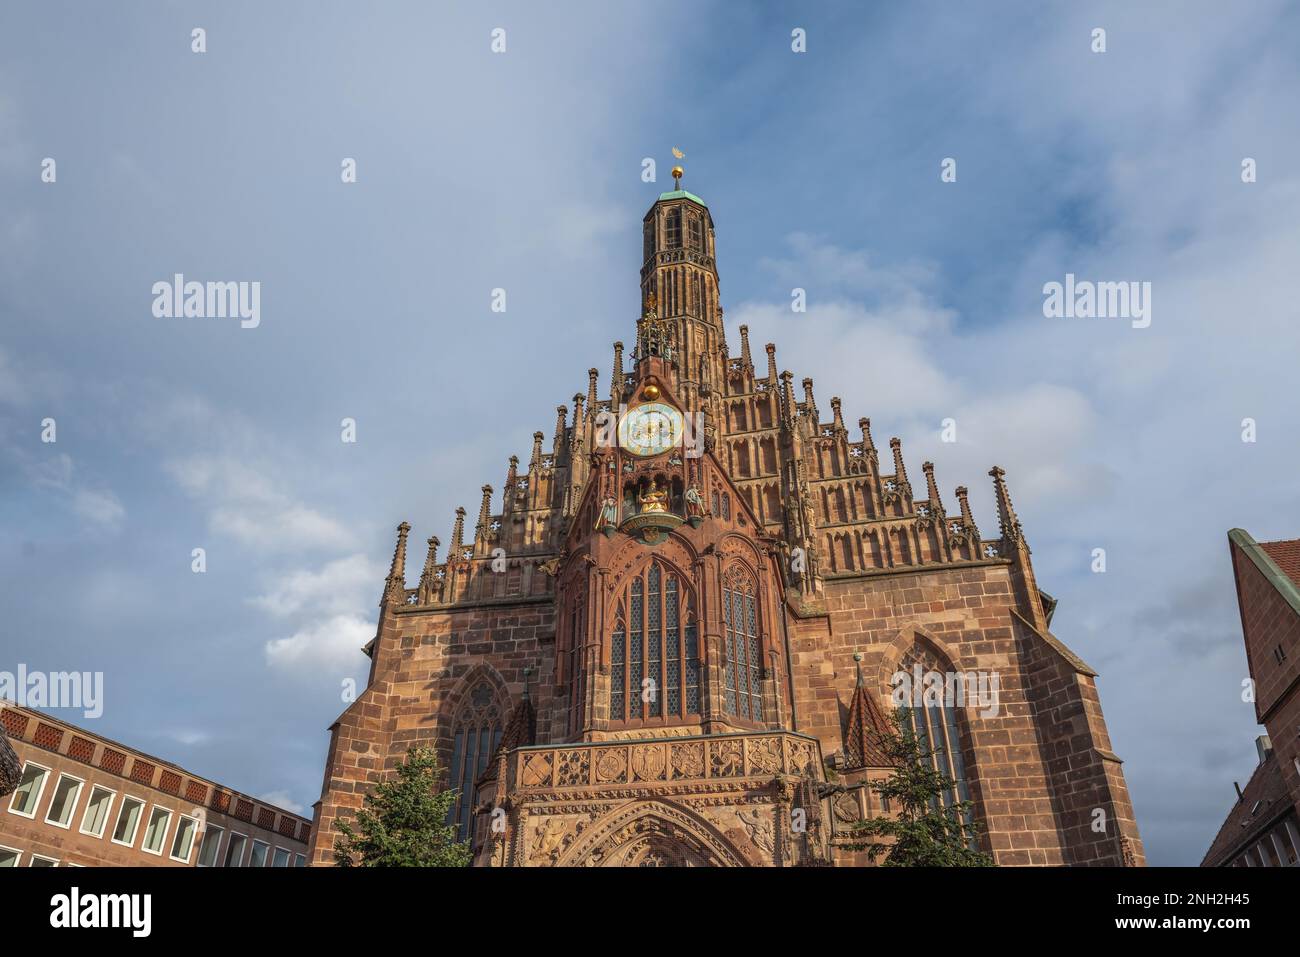 Frauenkirche (Church of Our Lady) at Hauptmarkt Square - Nuremberg, Bavaria, Germany Stock Photo